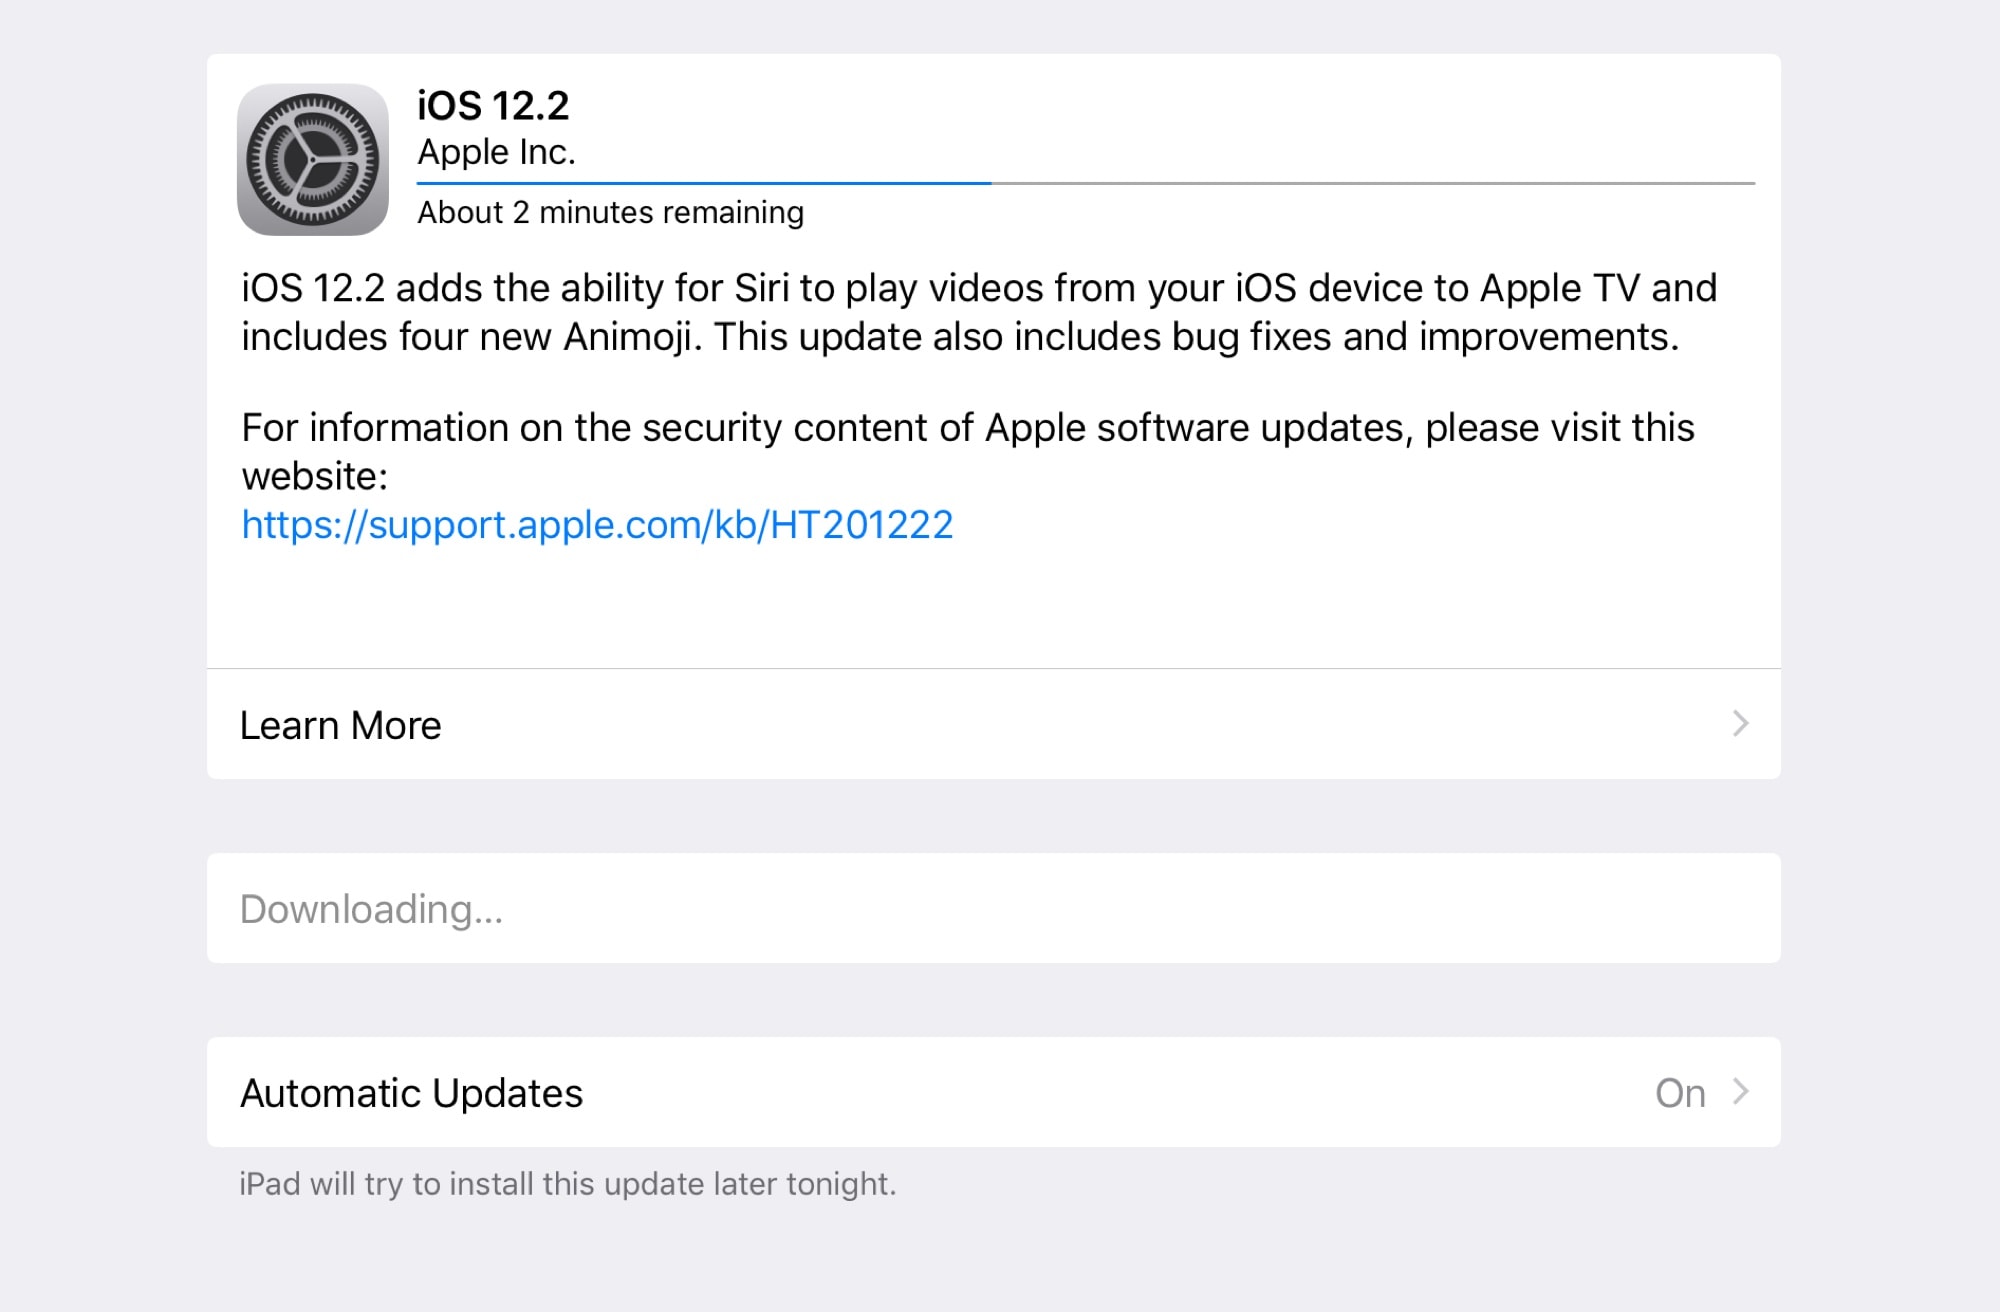 The new iOS 12.2 is available now.